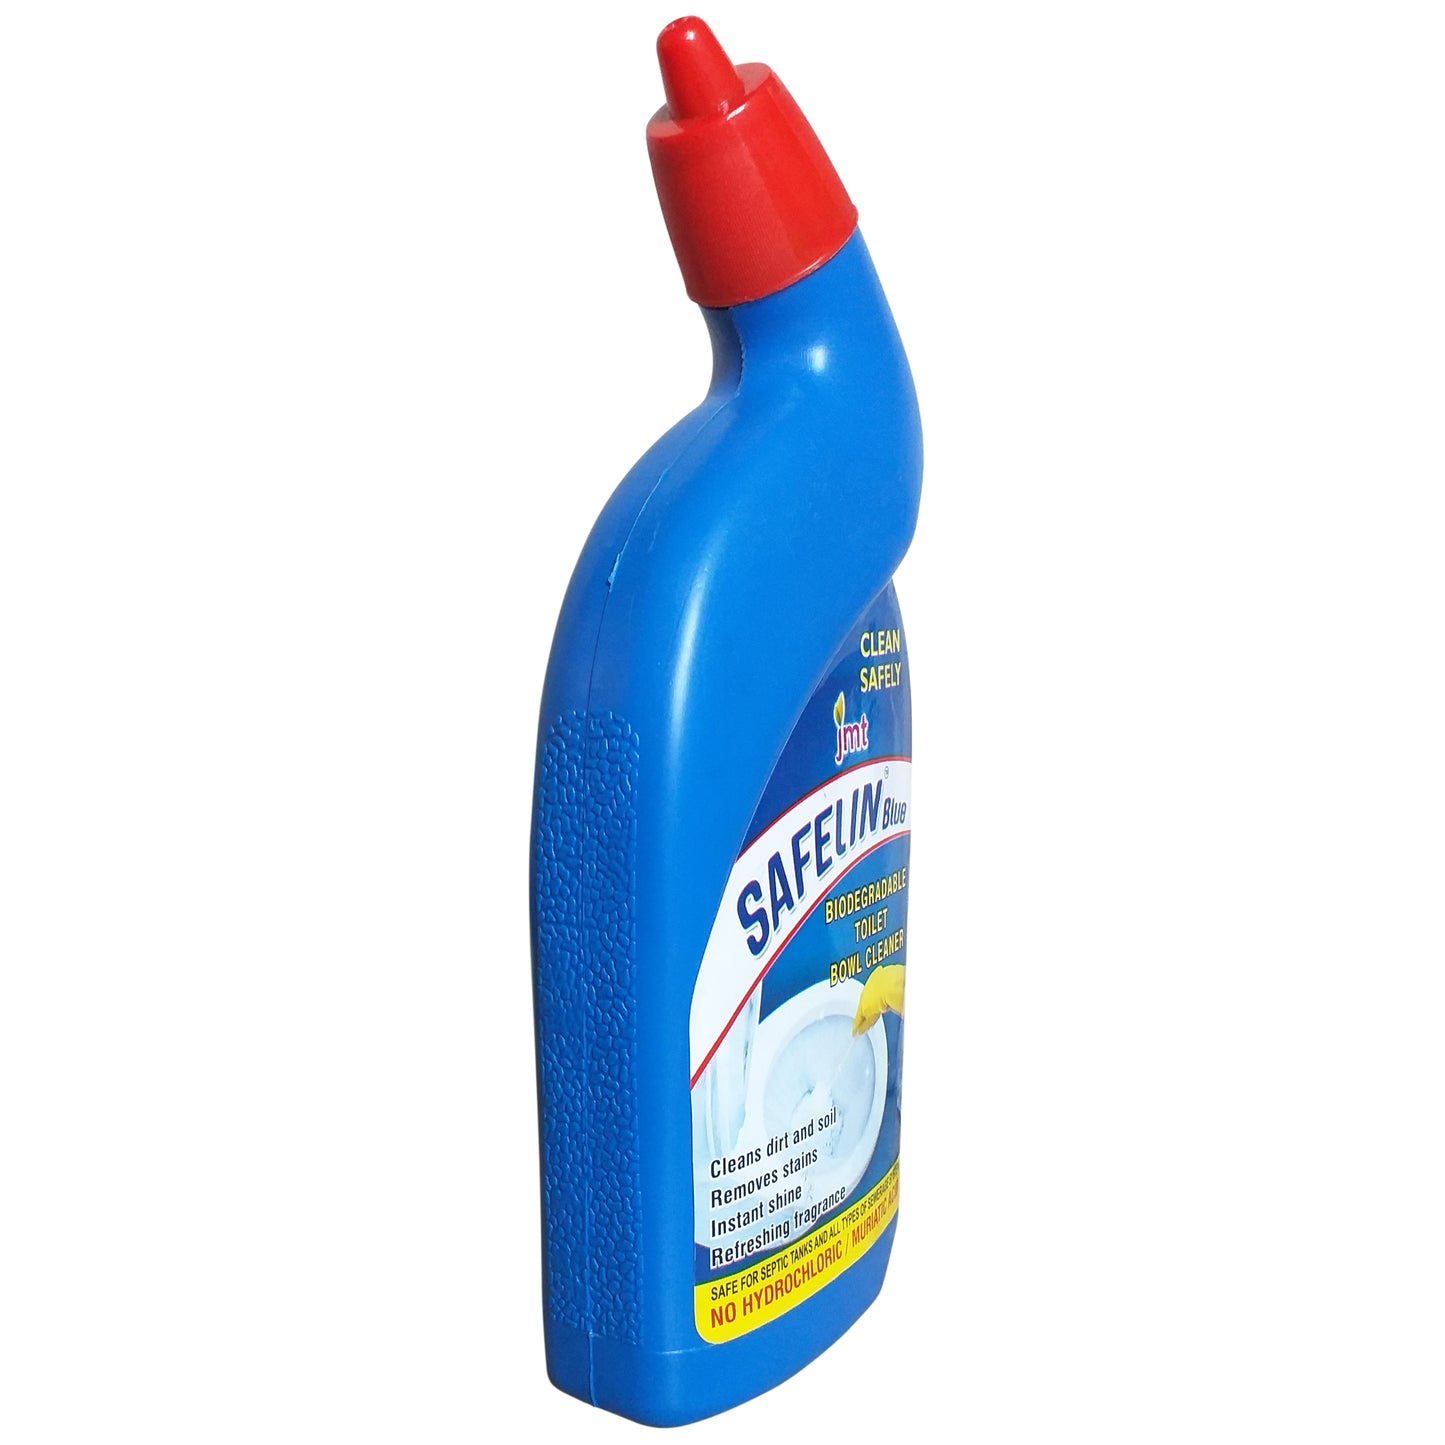 500ml Safelin Blue Biodegradable Toilet Bowl Cleaner without Hydrochloric Acid